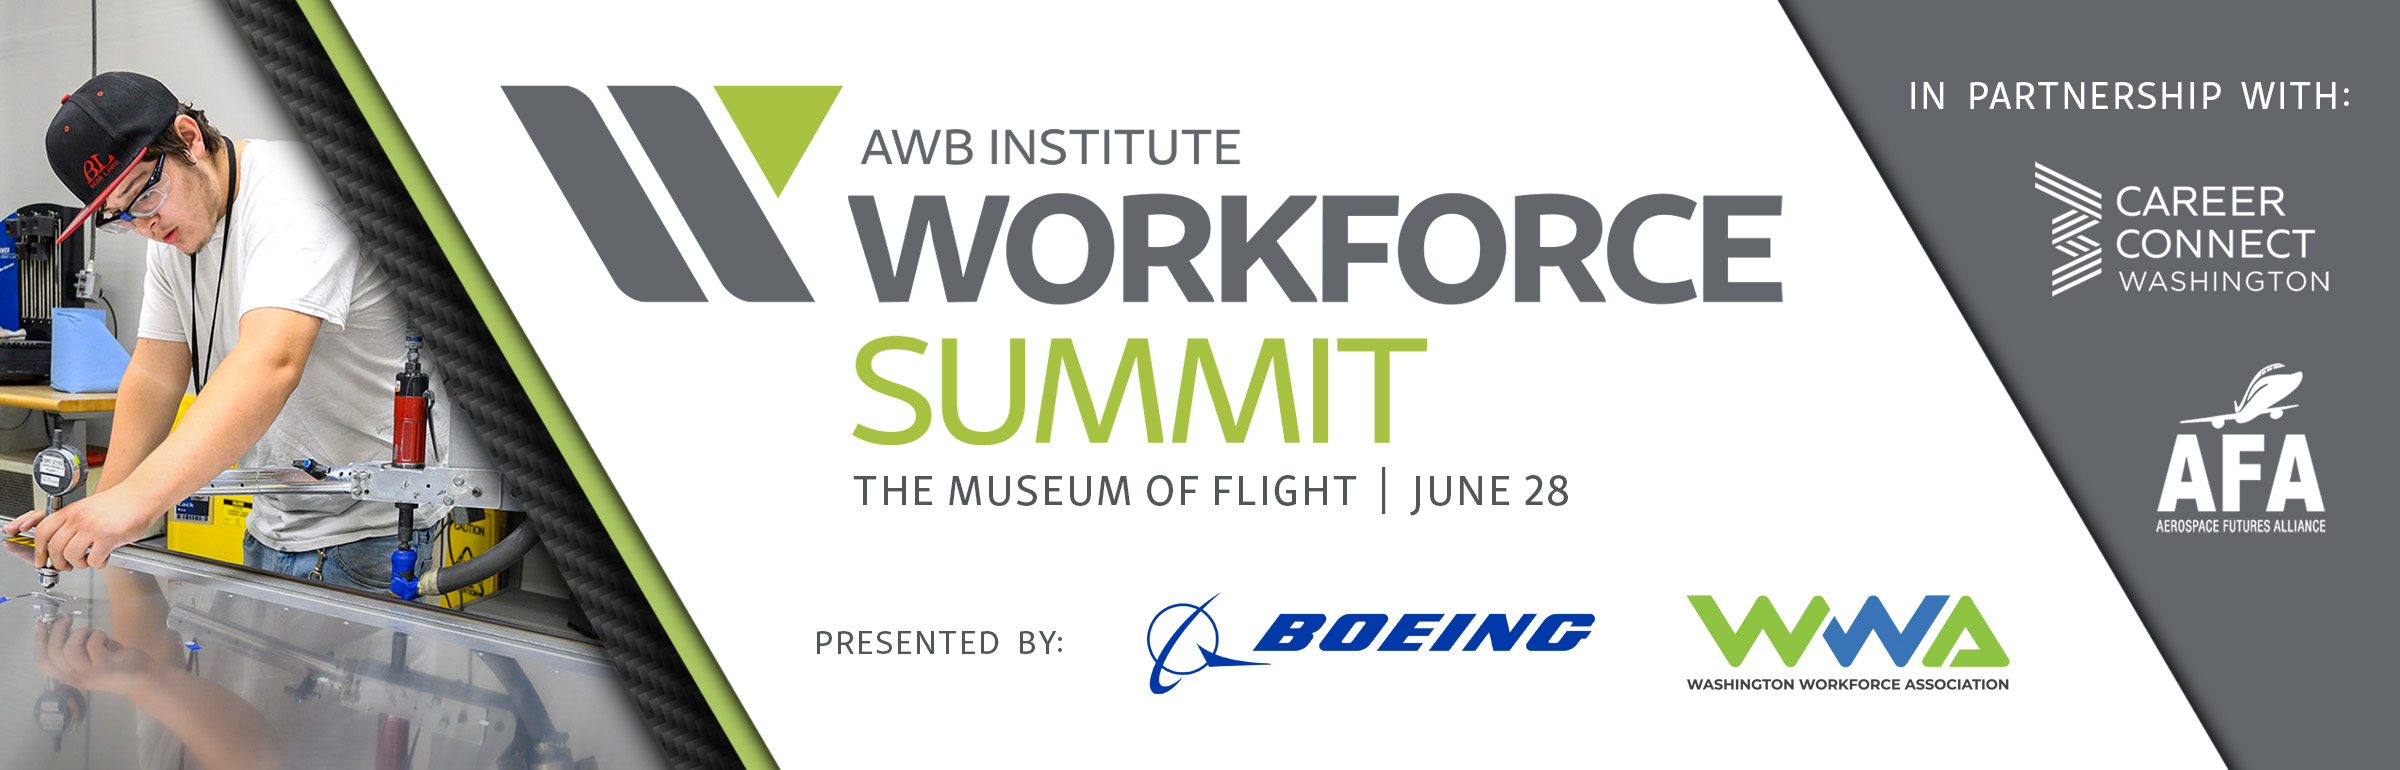 Event Promo Photo For Workforce Summit